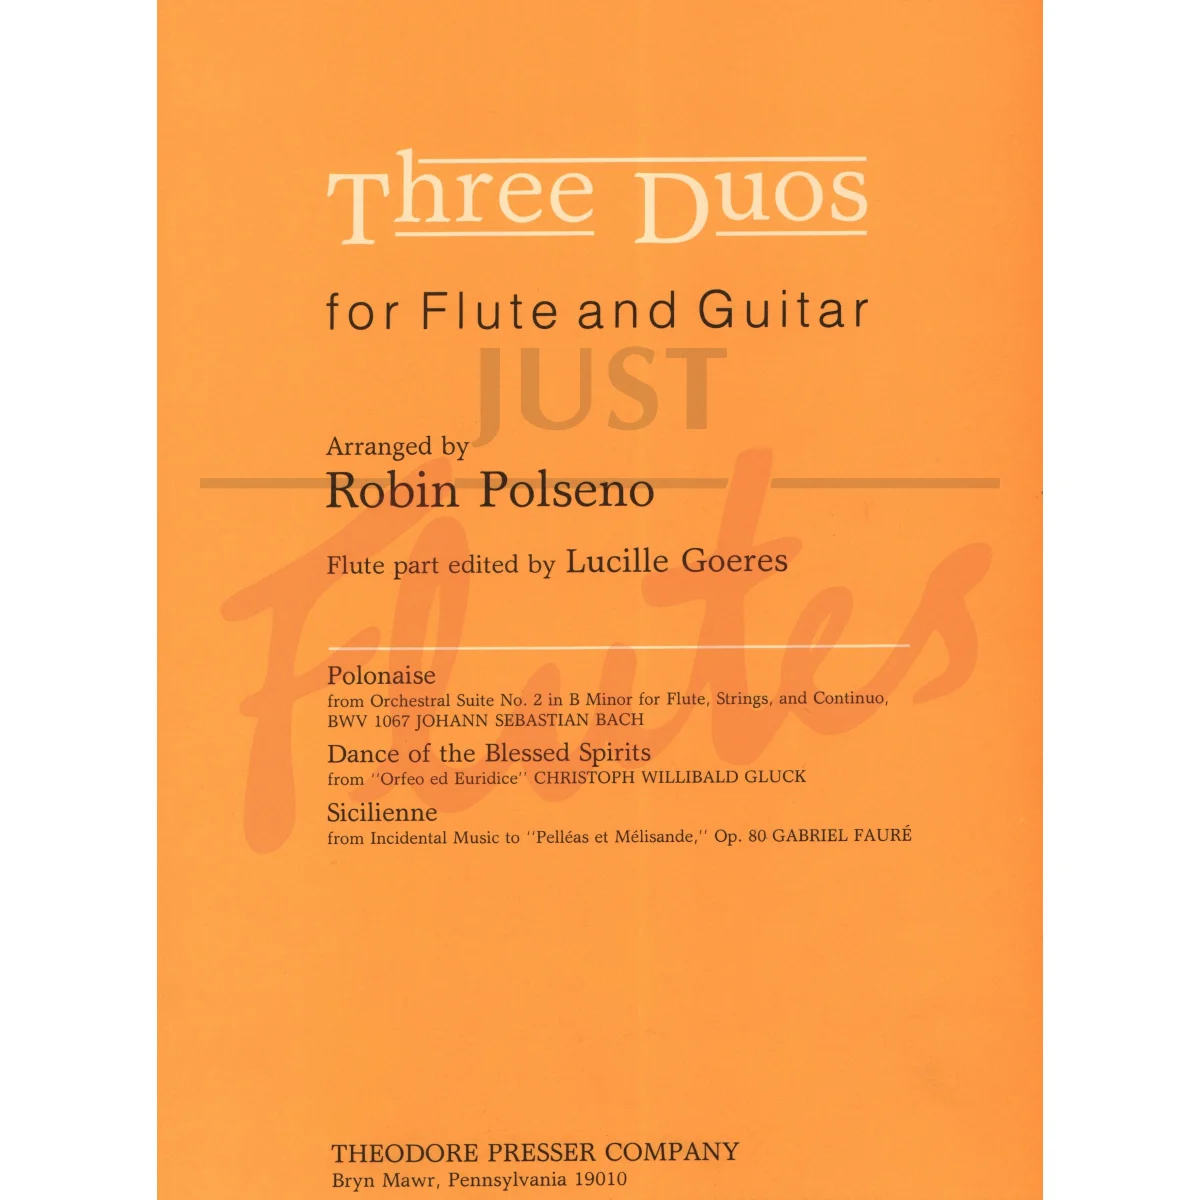 Three Duos for Flute and Guitar